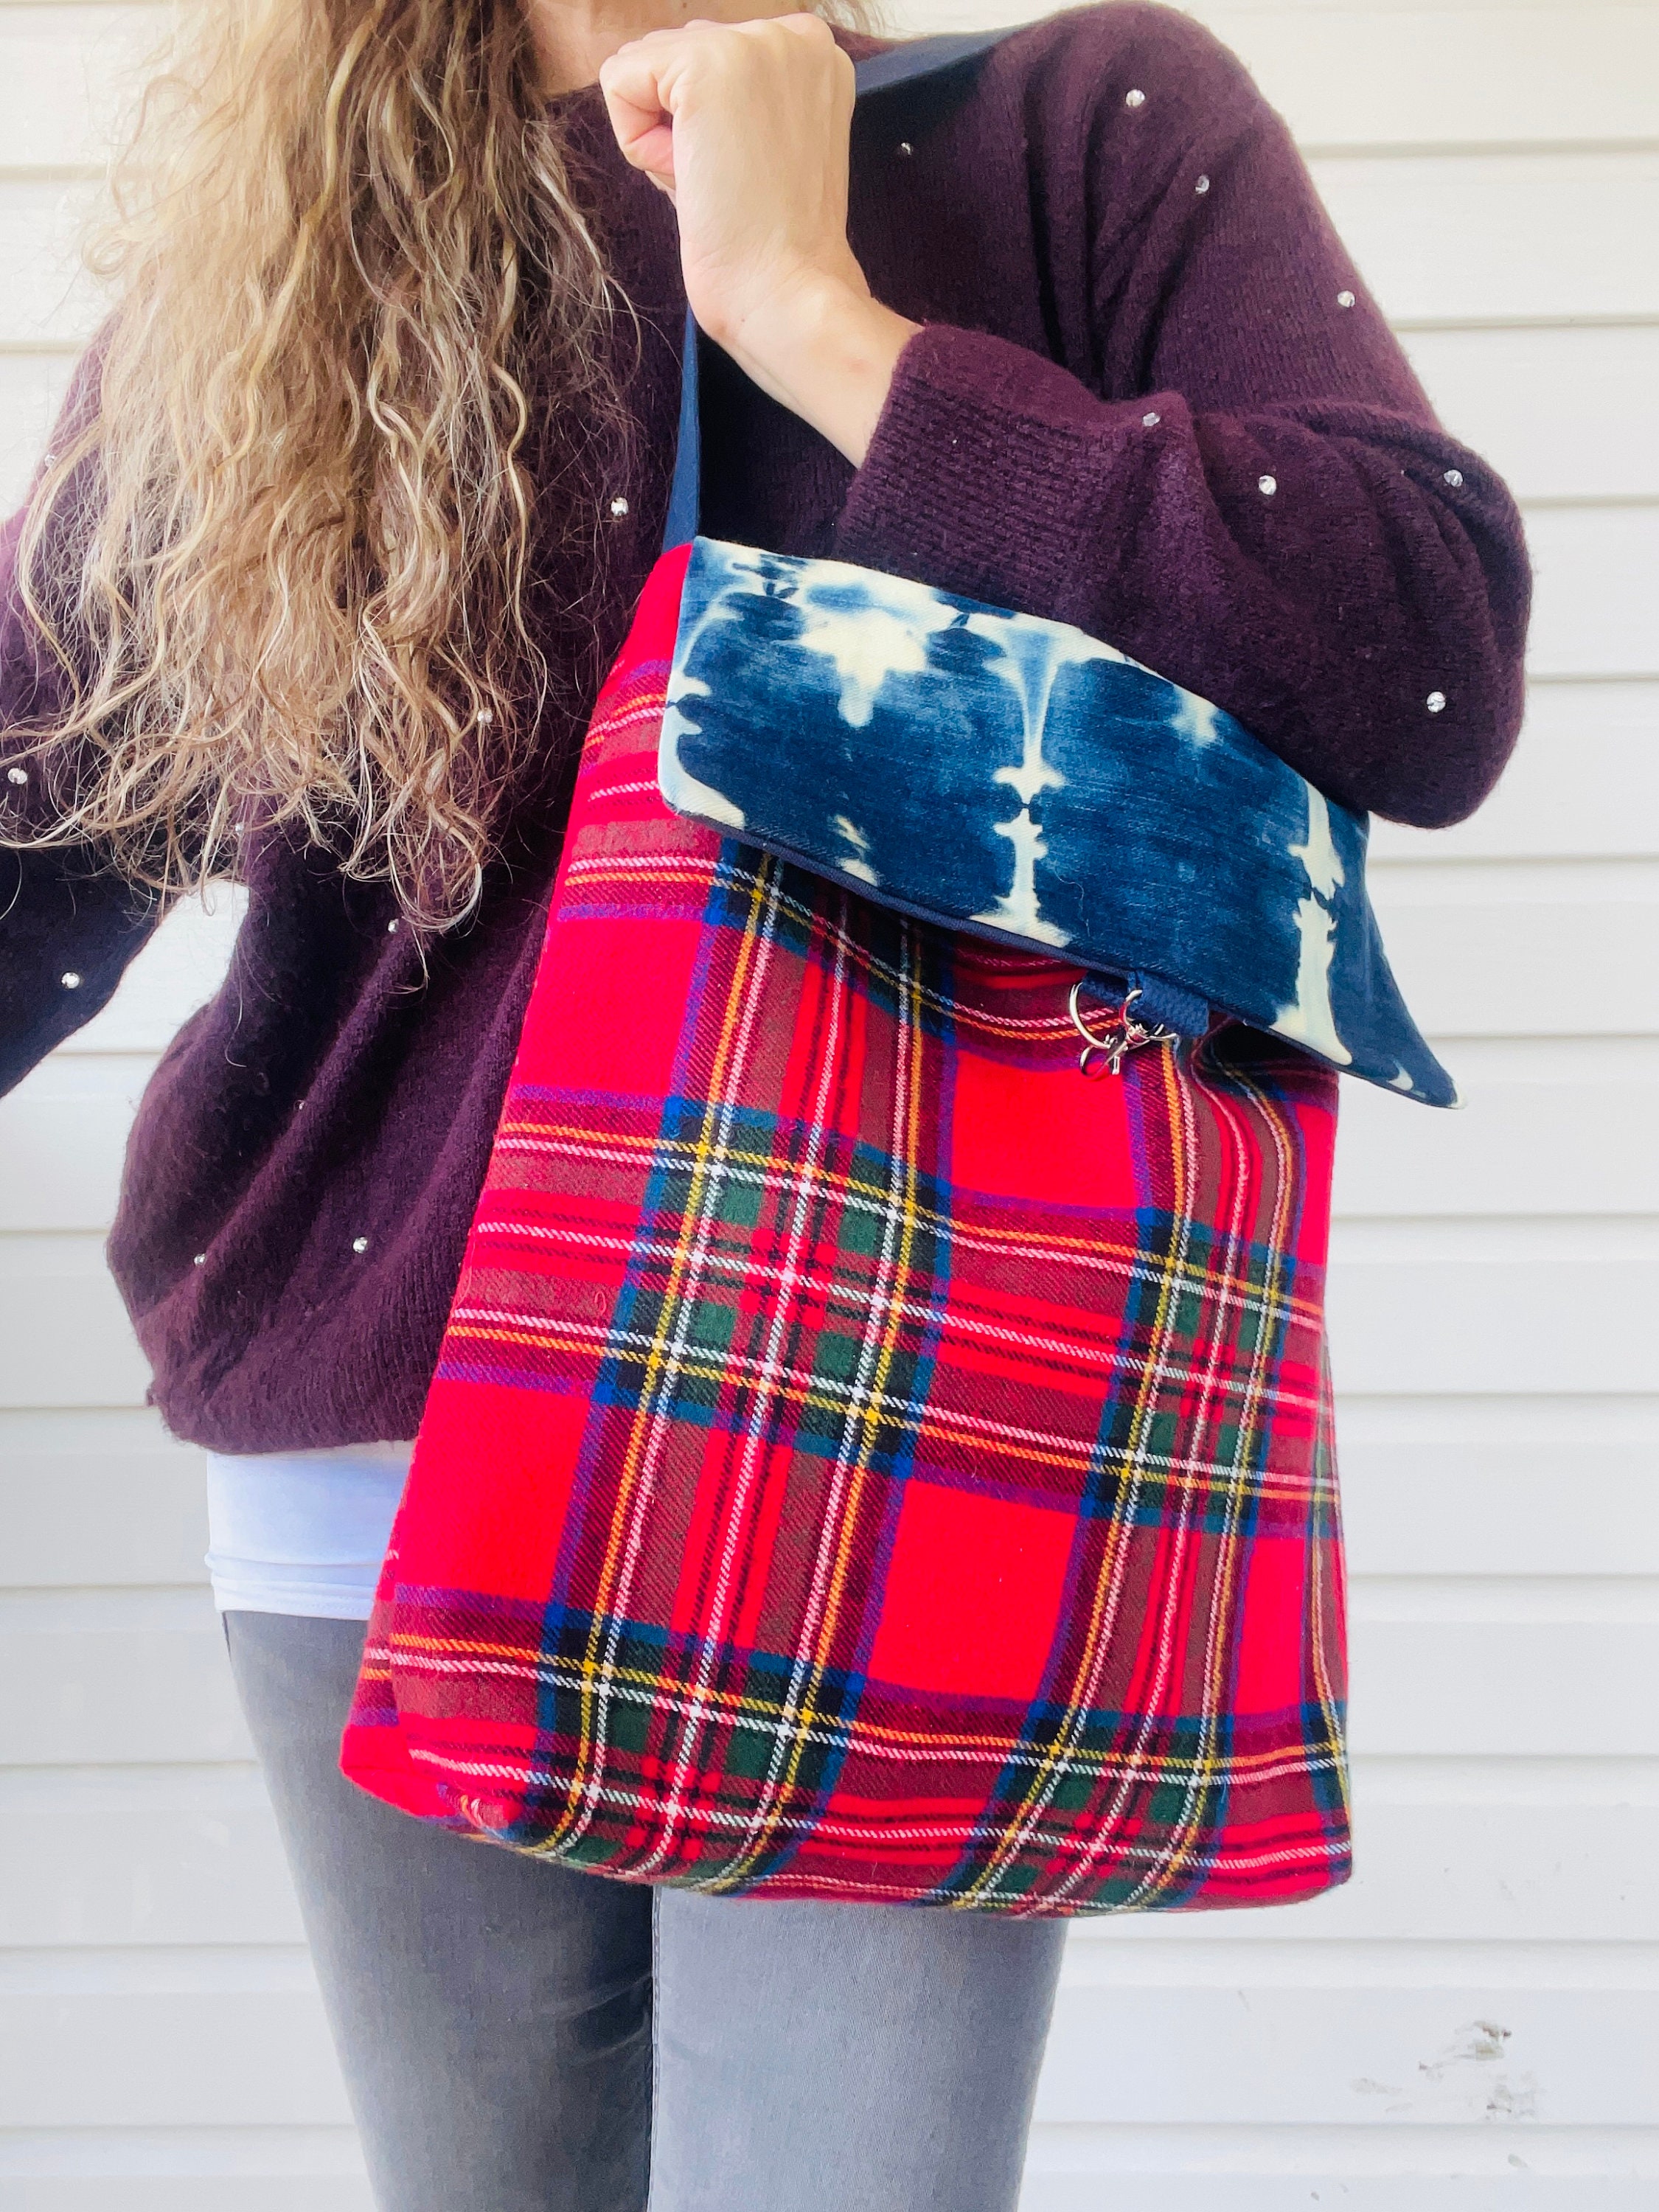 Flannel Tartan Plaid and Tie Dyed Tote With Flap Latch Closure. Lined ...